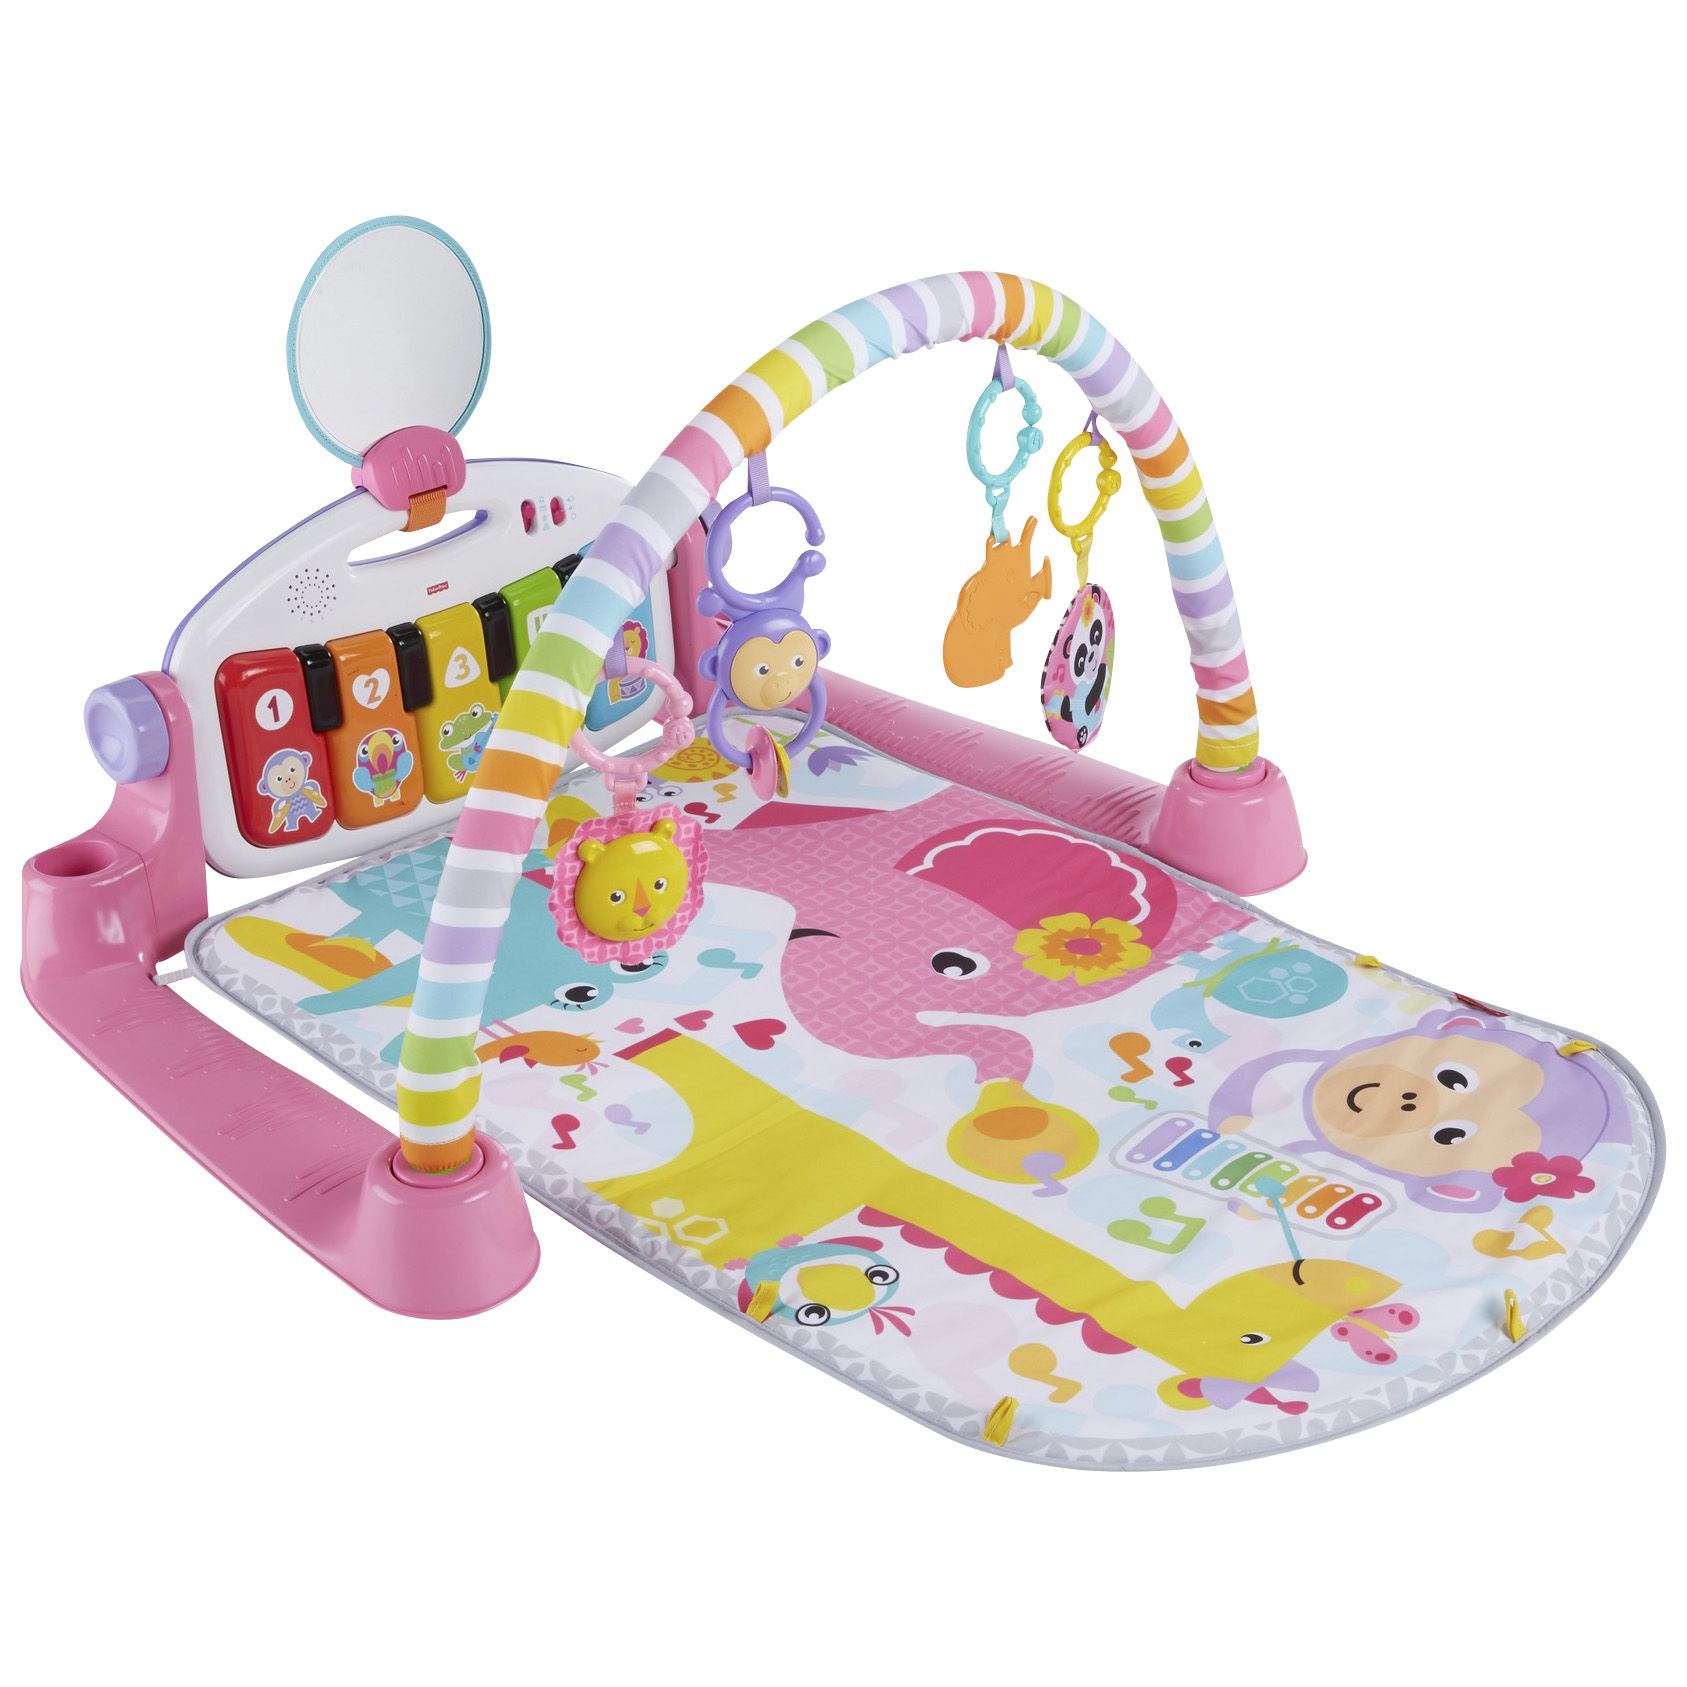 Fingerhut - Fisher-Price Deluxe Kick & Play Piano Gym – Pink